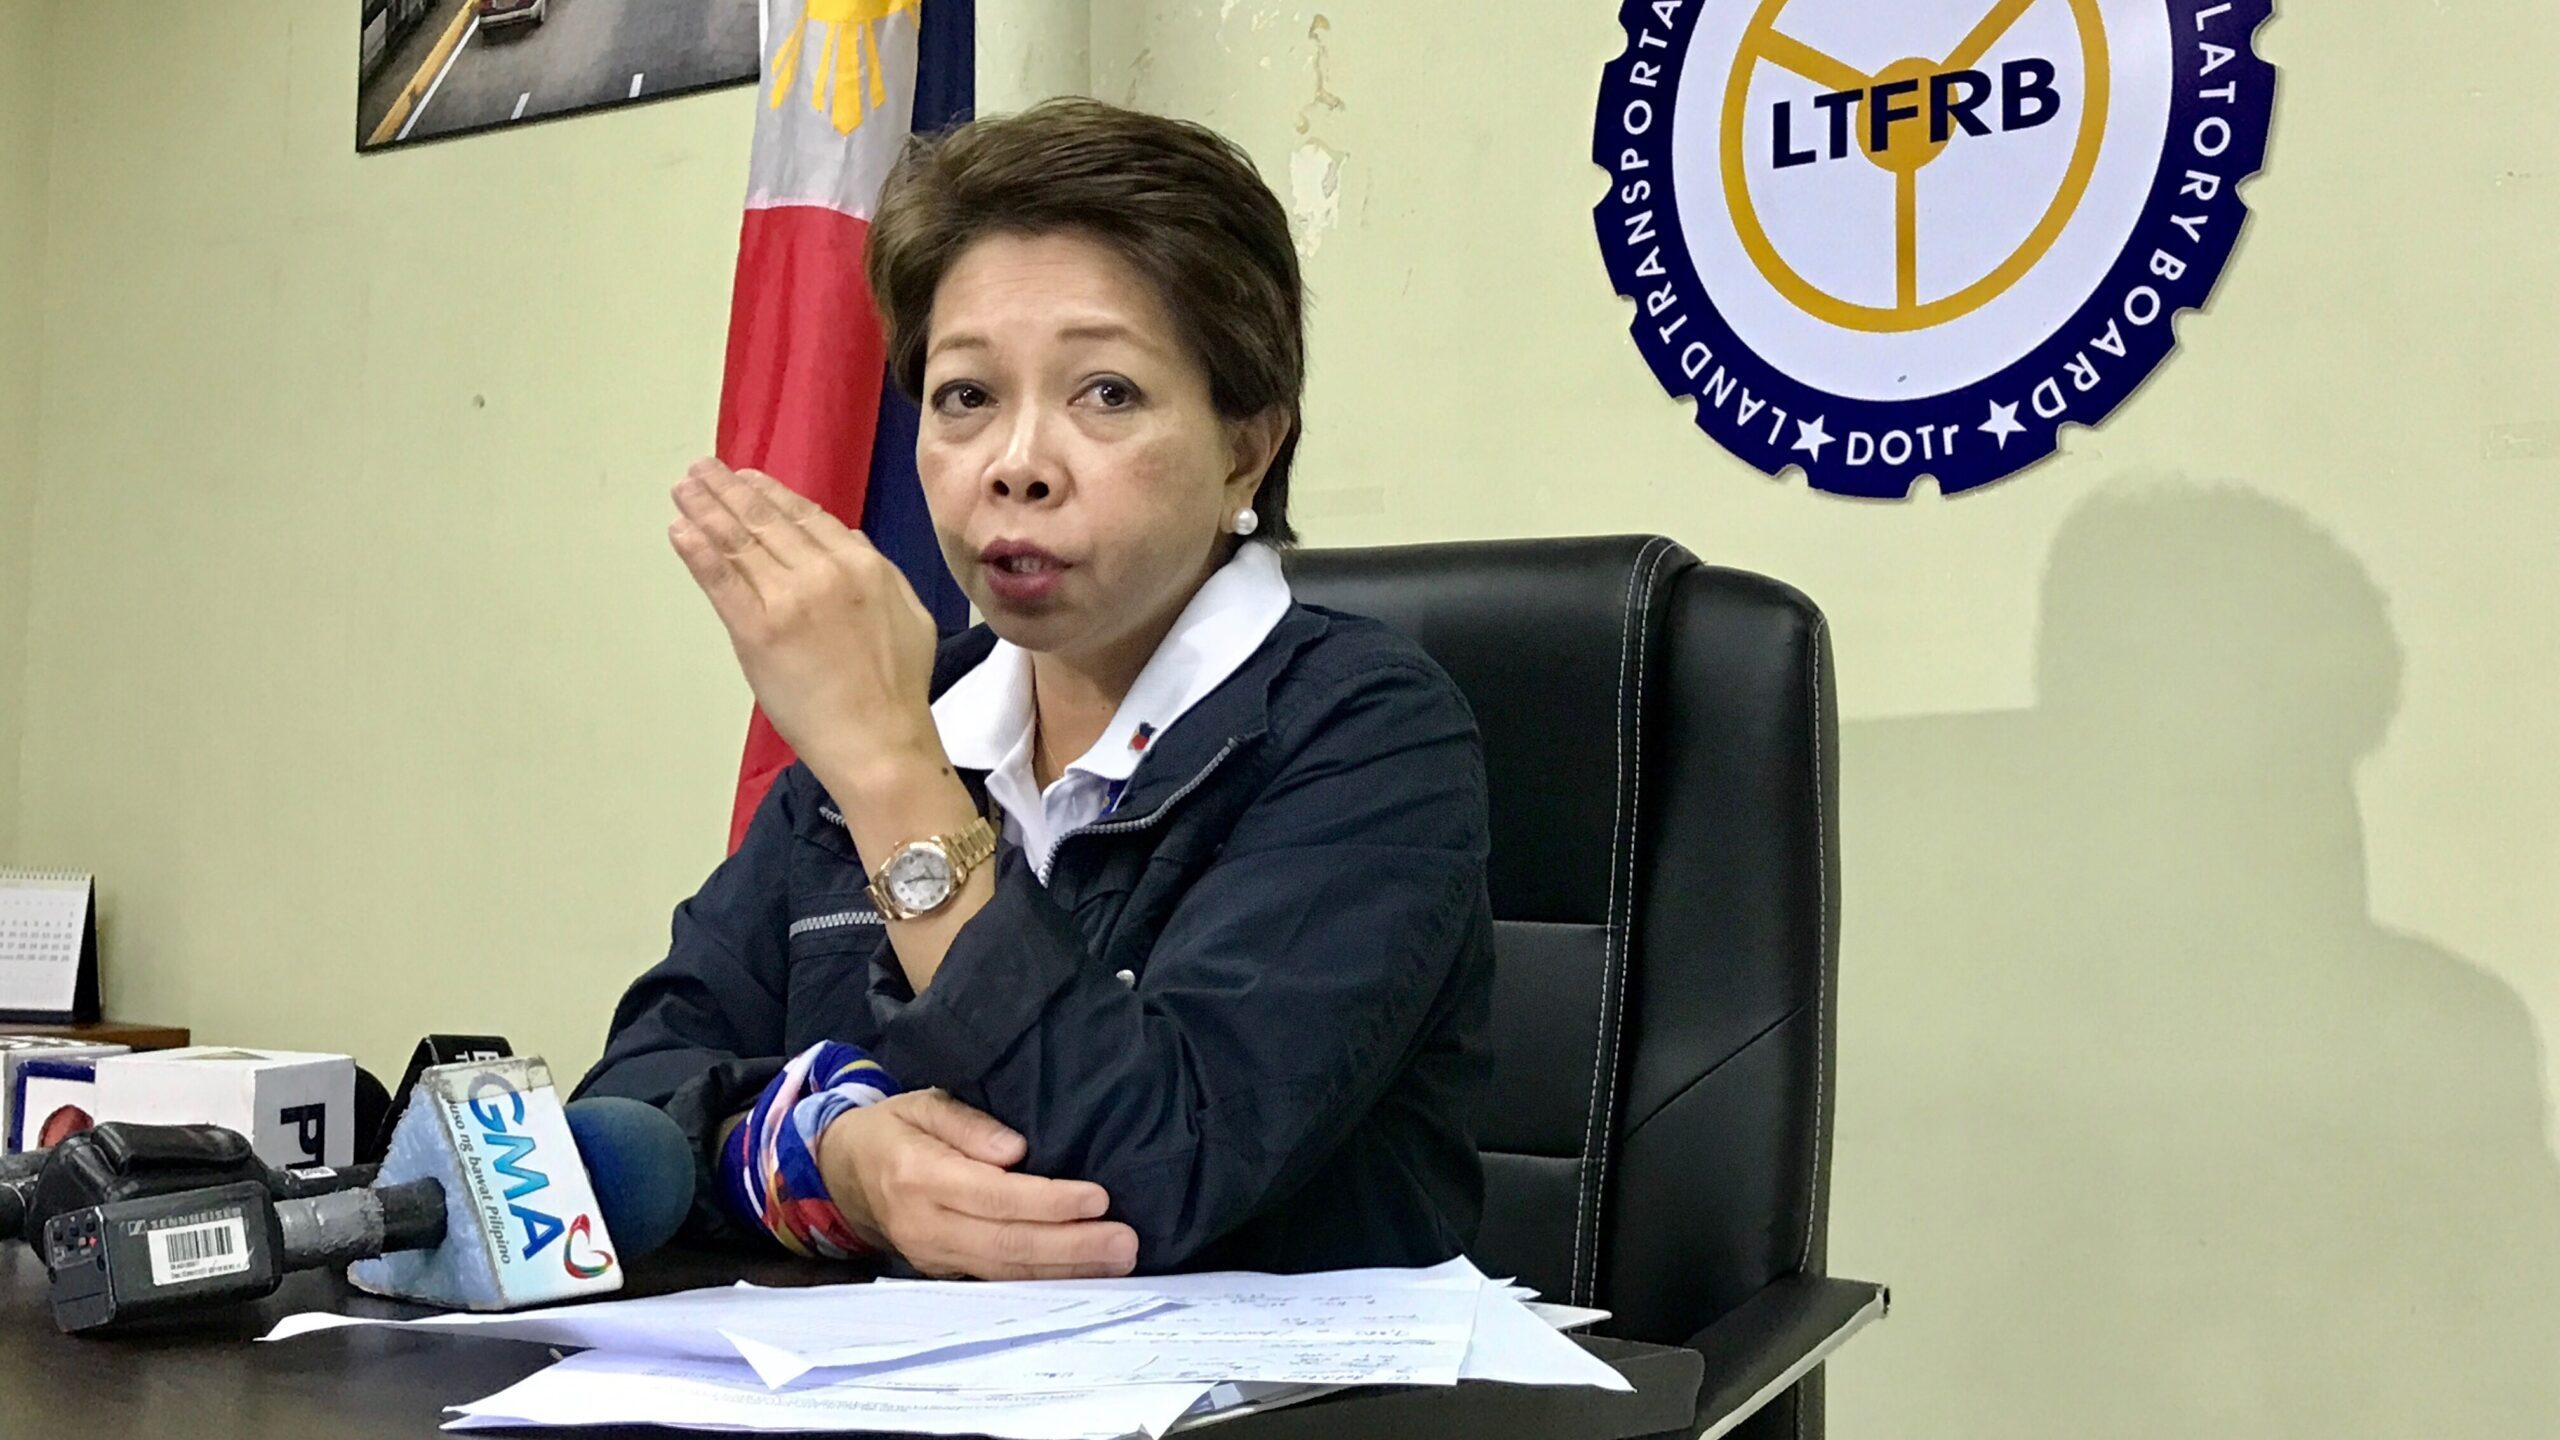 LTFRB limits cars under ride-hailing apps to 45,700